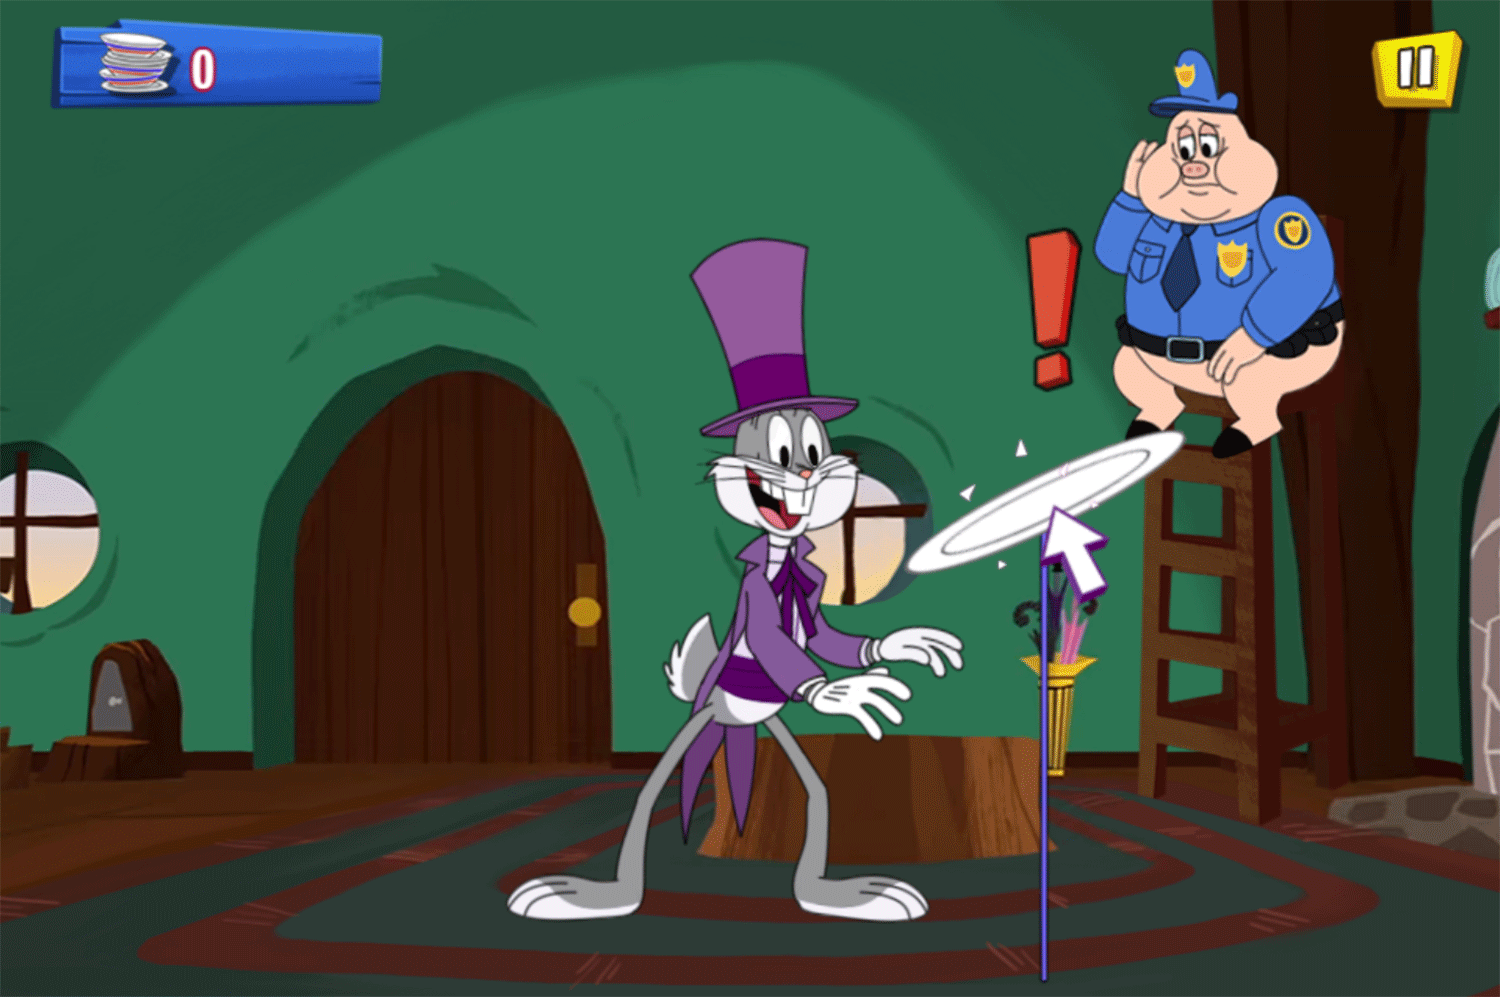 New Looney Tunes Tricky Plates Game How To Play Screenshot.